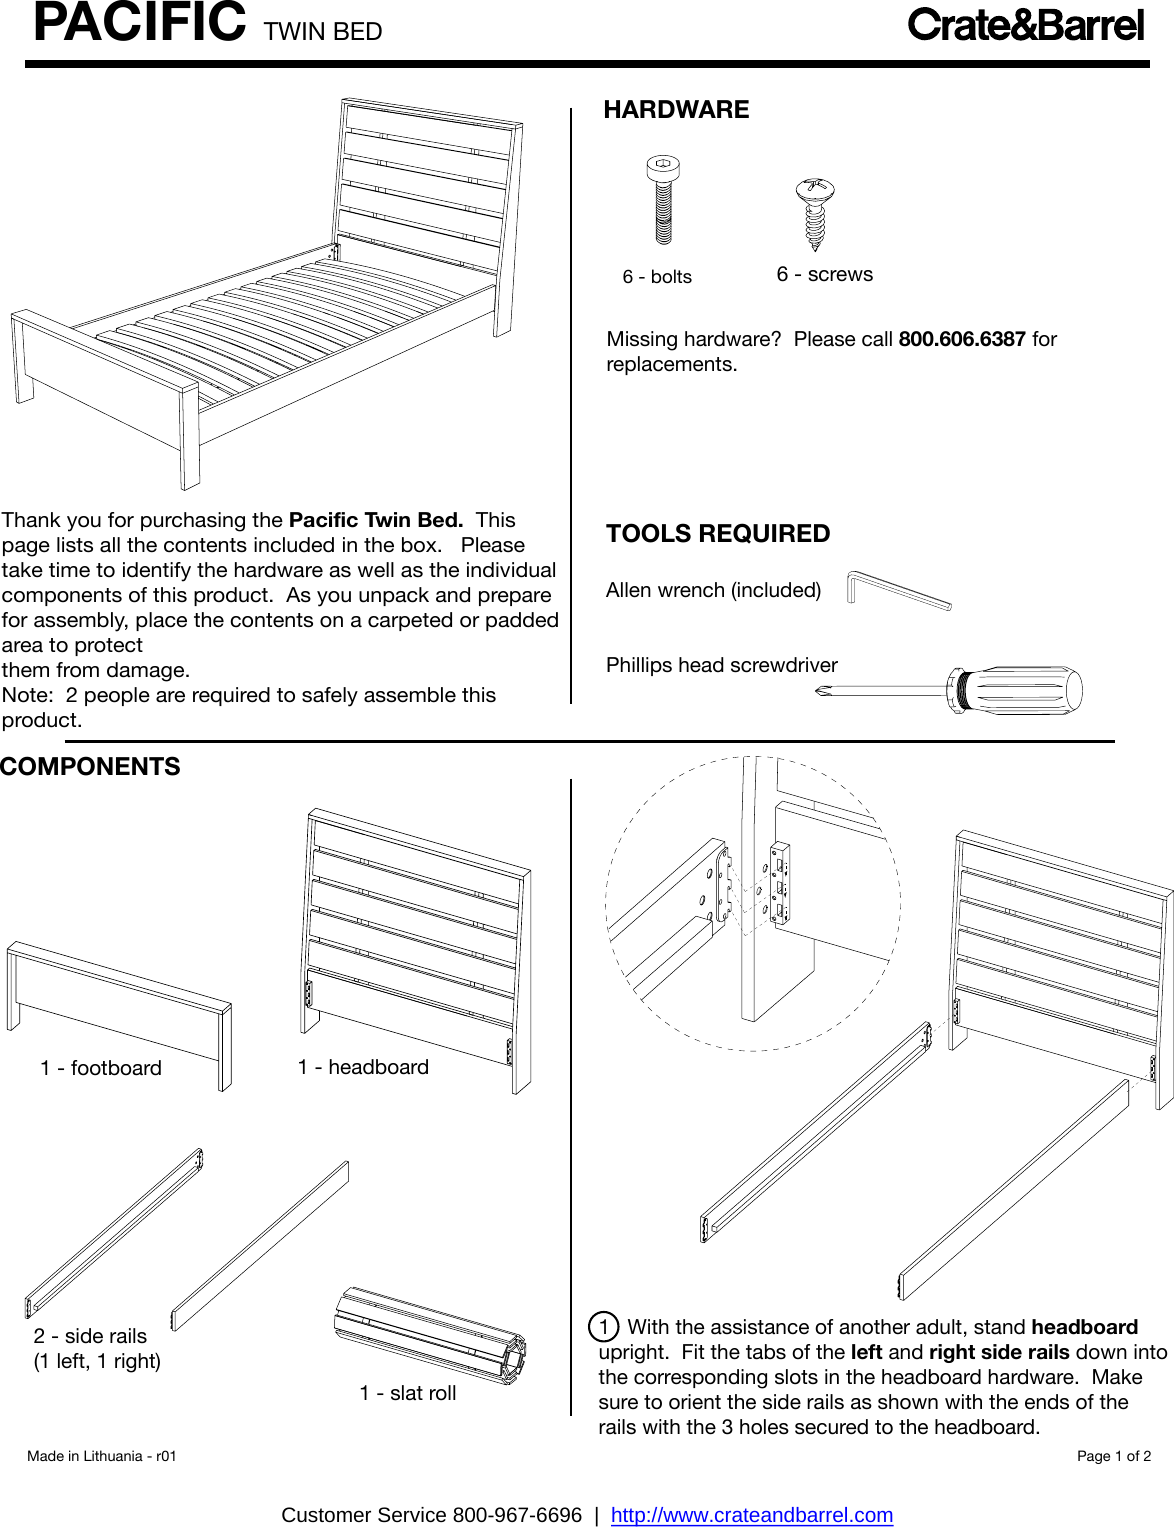 Crate Barrel 752 Pacific Twin Bed, Crate And Barrel Bed Frame Instructions